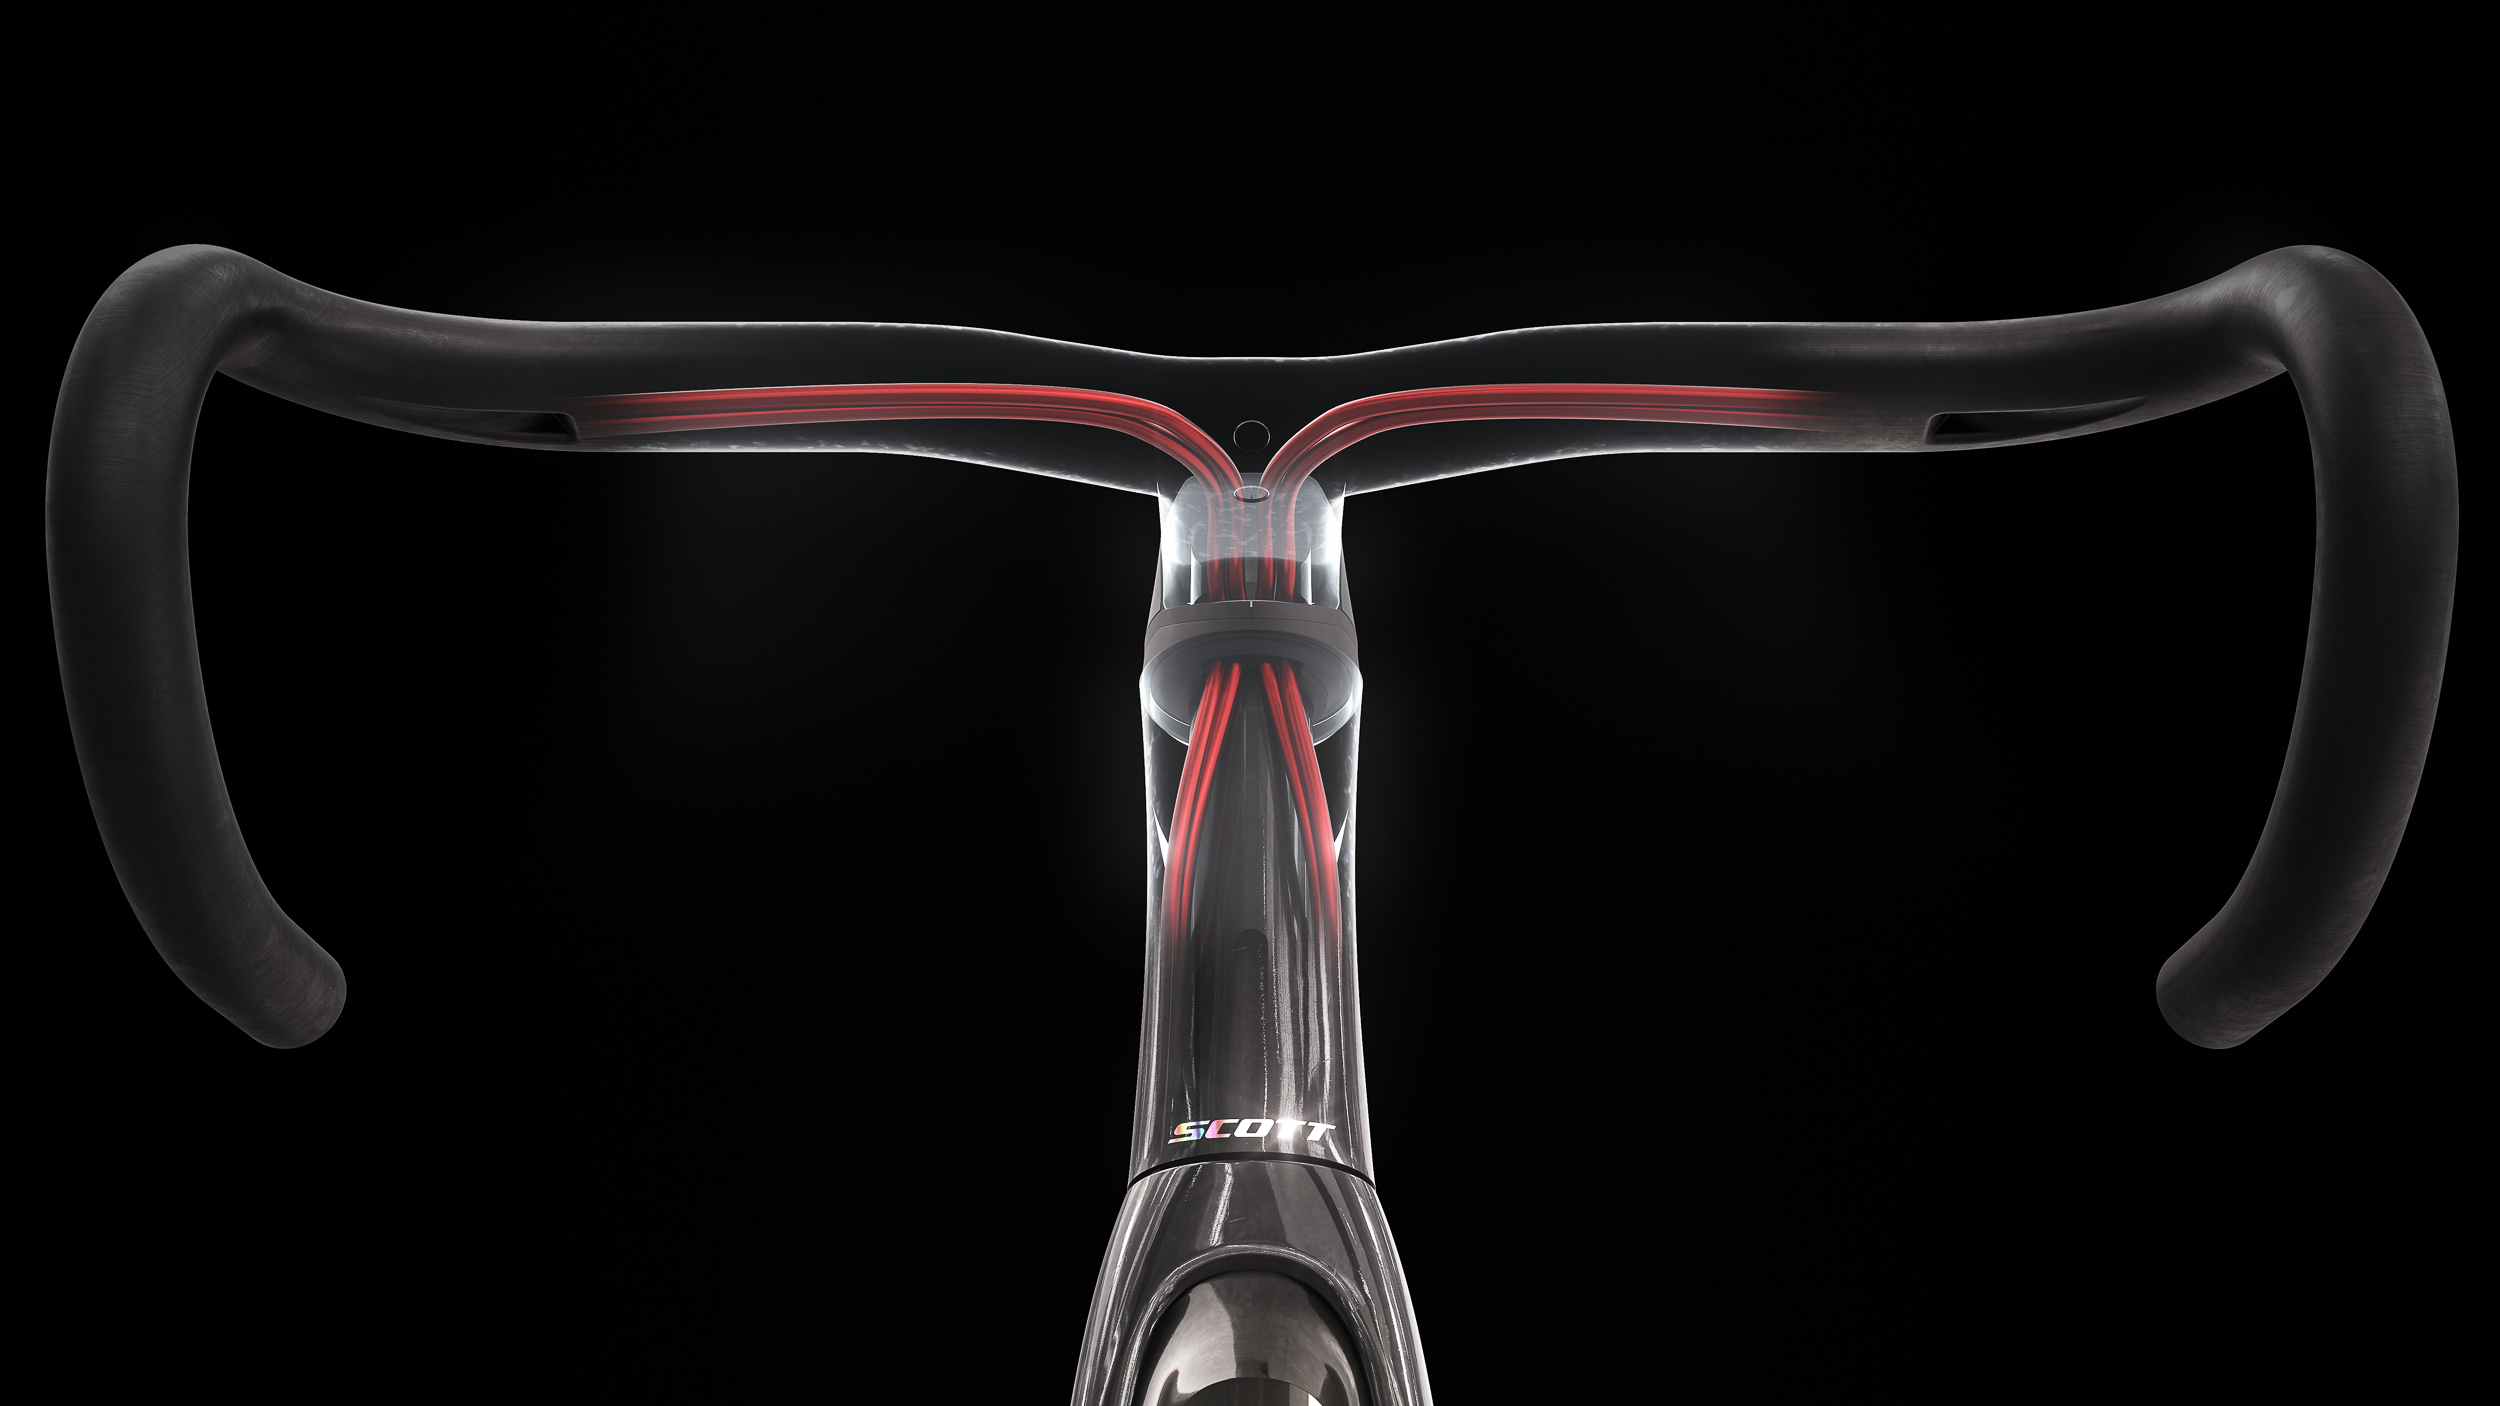 1.5" headset top and bottom, fork steerer with 1 1/4" top and 1.5" bottom